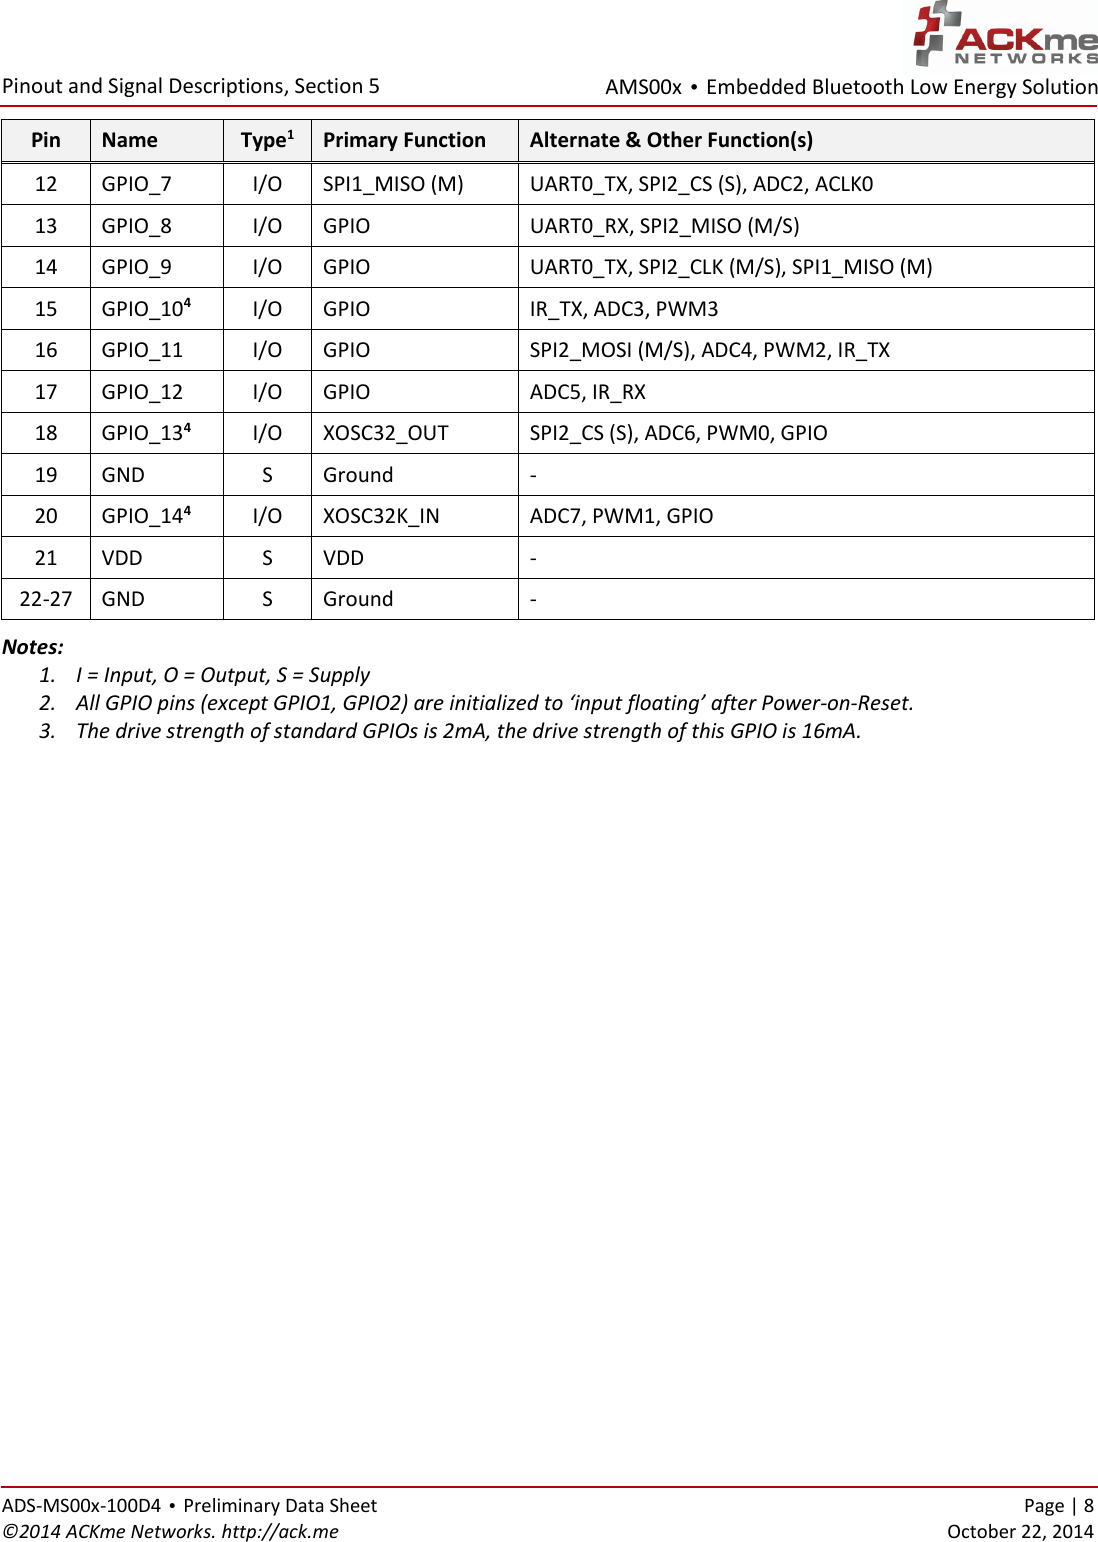 AMS00x • Embedded Bluetooth Low Energy Solution  Pinout and Signal Descriptions, Section 5 ADS-MS00x-100D4 • Preliminary Data Sheet    Page | 8 ©2014 ACKme Networks. http://ack.me    October 22, 2014 Pin Name Type1 Primary Function  Alternate &amp; Other Function(s) 12 GPIO_7 I/O SPI1_MISO (M) UART0_TX, SPI2_CS (S), ADC2, ACLK0 13 GPIO_8 I/O GPIO UART0_RX, SPI2_MISO (M/S) 14 GPIO_9 I/O GPIO UART0_TX, SPI2_CLK (M/S), SPI1_MISO (M) 15 GPIO_104 I/O GPIO IR_TX, ADC3, PWM3 16 GPIO_11 I/O GPIO SPI2_MOSI (M/S), ADC4, PWM2, IR_TX 17 GPIO_12 I/O GPIO ADC5, IR_RX 18 GPIO_134 I/O XOSC32_OUT SPI2_CS (S), ADC6, PWM0, GPIO 19 GND S Ground - 20 GPIO_144 I/O XOSC32K_IN ADC7, PWM1, GPIO 21 VDD S VDD - 22-27 GND S Ground - Notes: 1. I = Input, O = Output, S = Supply 2. All GPIO pins (except GPIO1, GPIO2) are initialized to ‘input floating’ after Power-on-Reset. 3. The drive strength of standard GPIOs is 2mA, the drive strength of this GPIO is 16mA.  